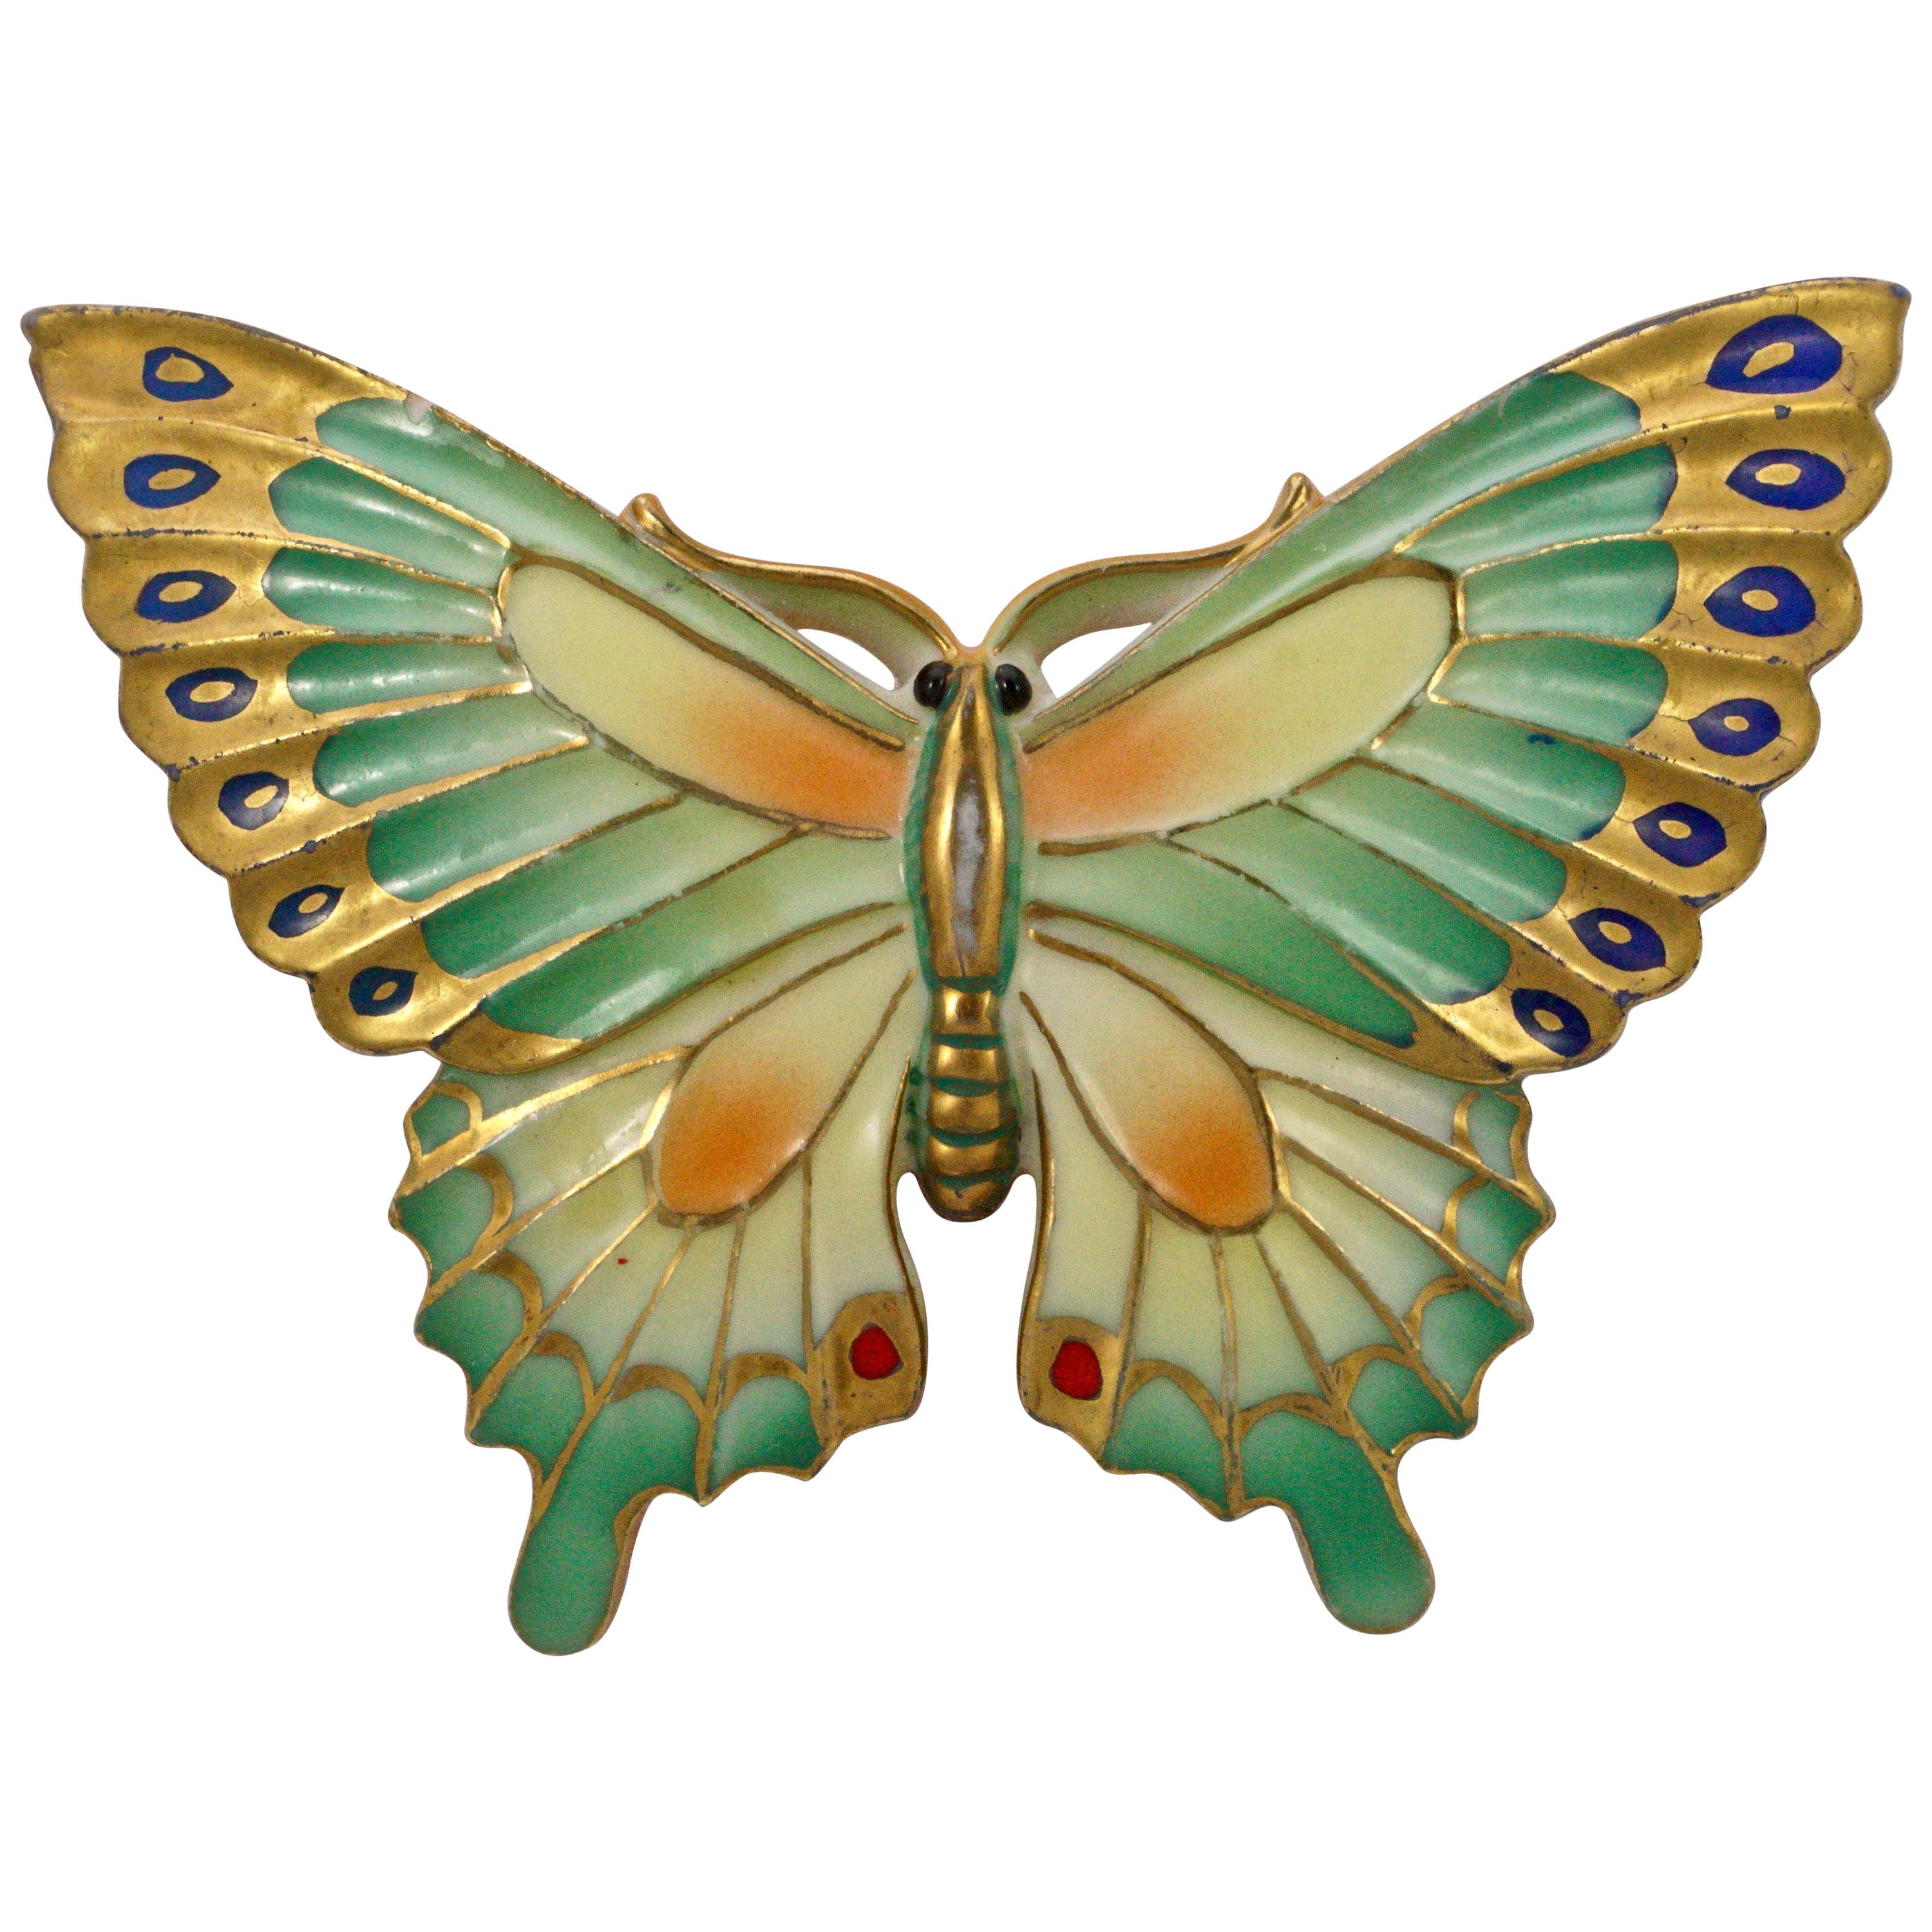 Toshikane Japan Porcelain Multi Coloured Butterfly Brooch with Silver Tone Back